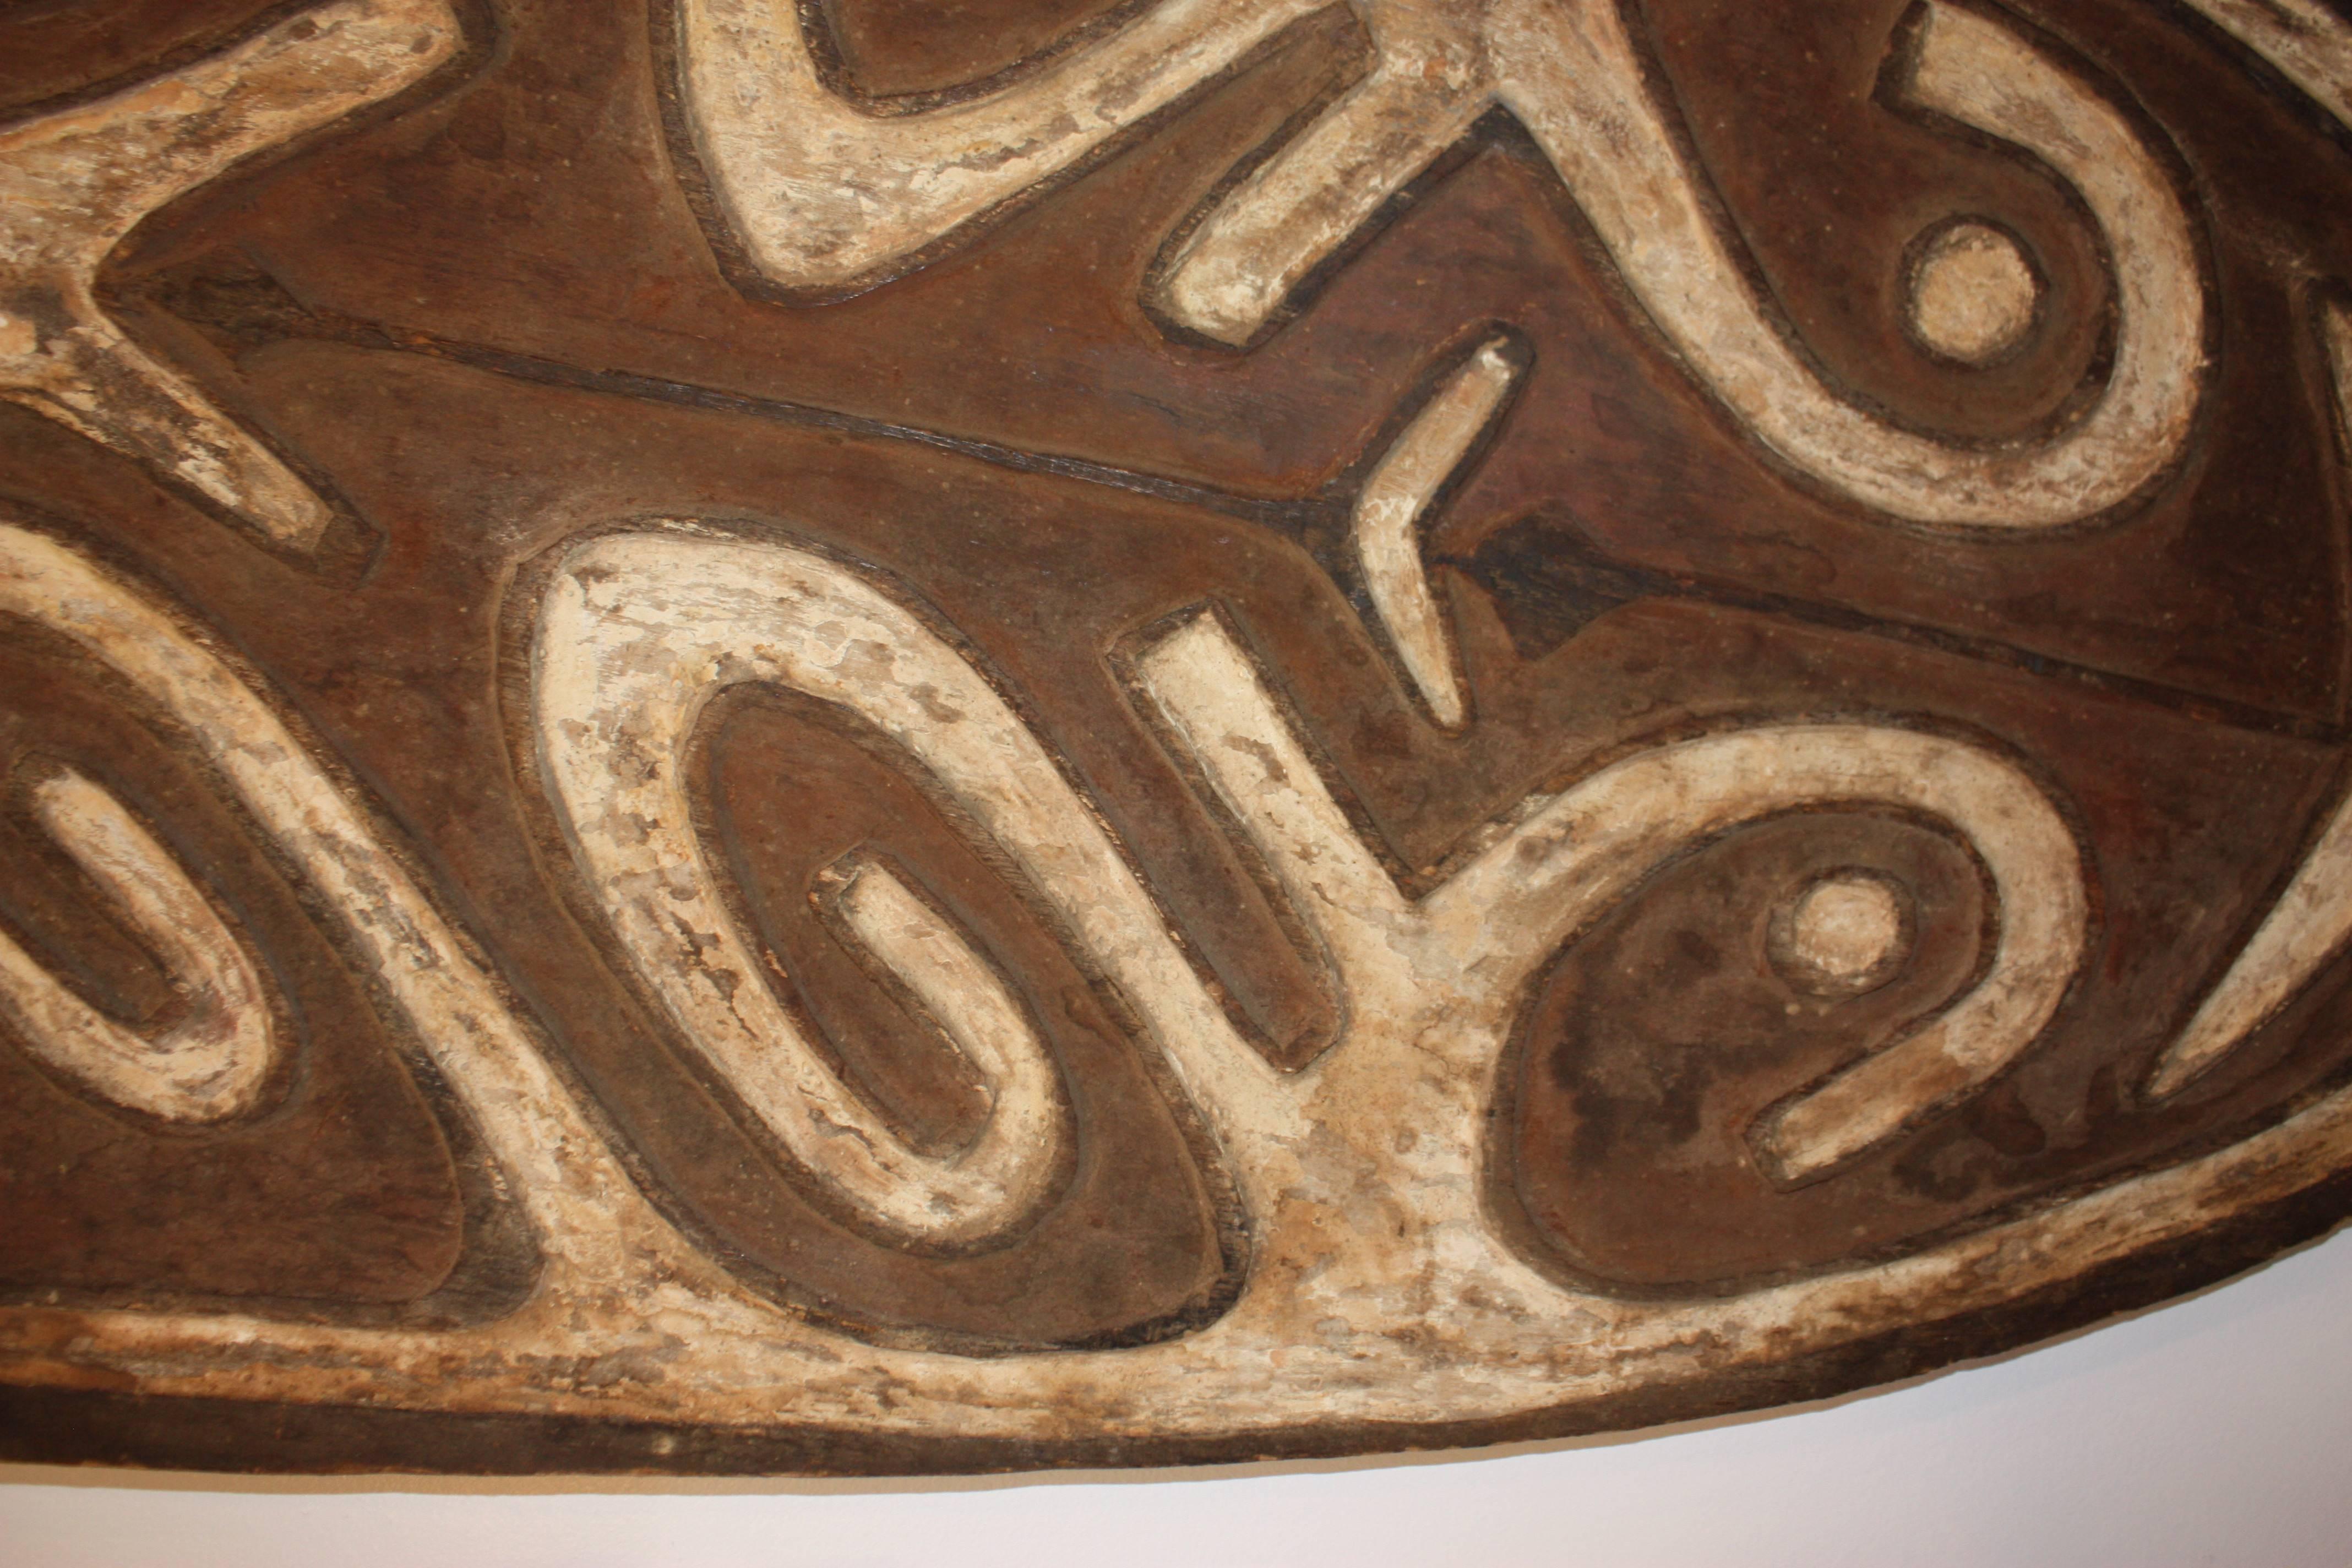 A large ancestor board from New Guinea.